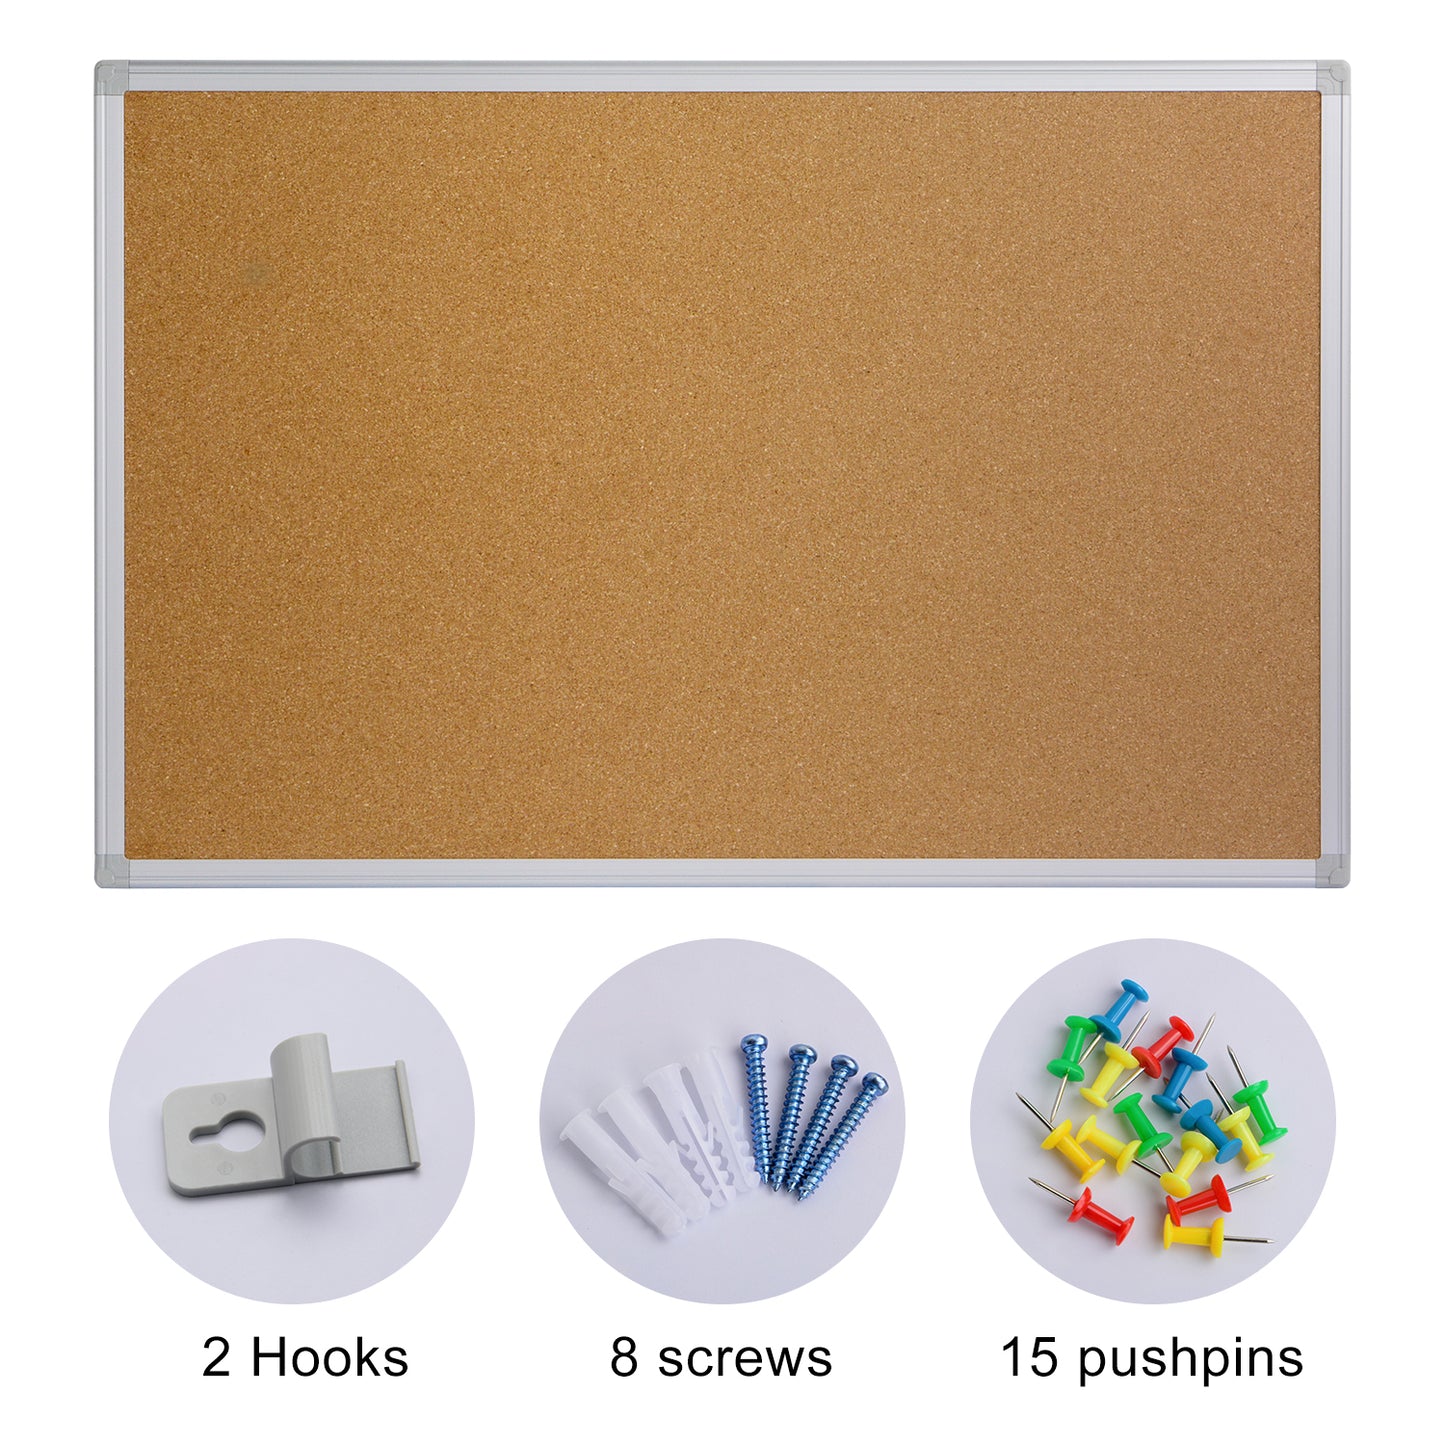 Cork Board 24x36 , Notice Cork Bulletin Board, Cork board with Aluminum Frame and Push Pins for Display